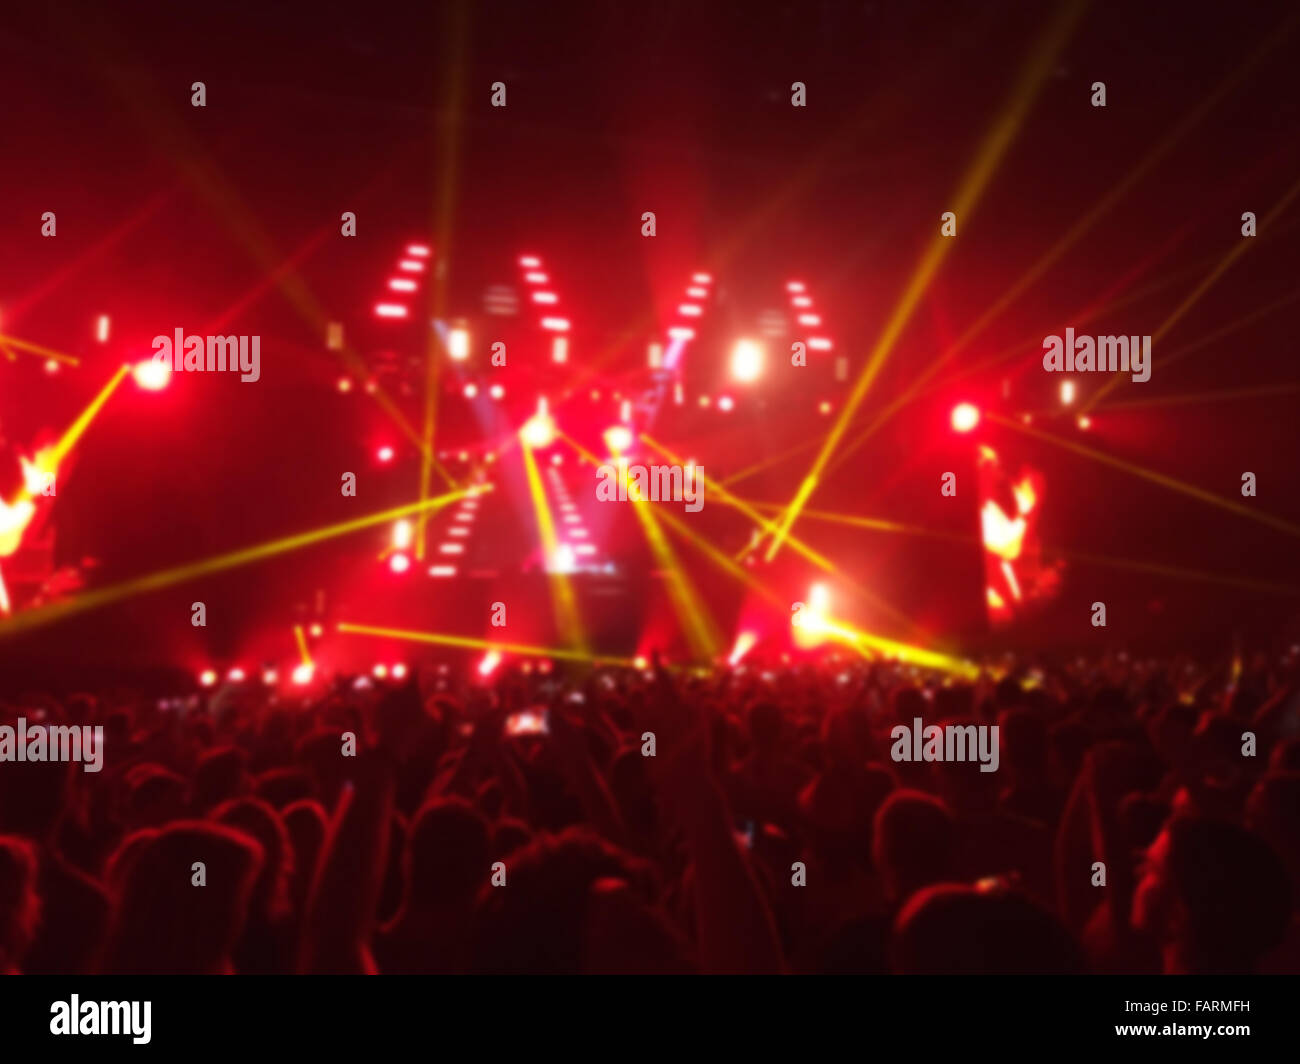 Blur shot of crowd on music concert with lights effects Stock Photo